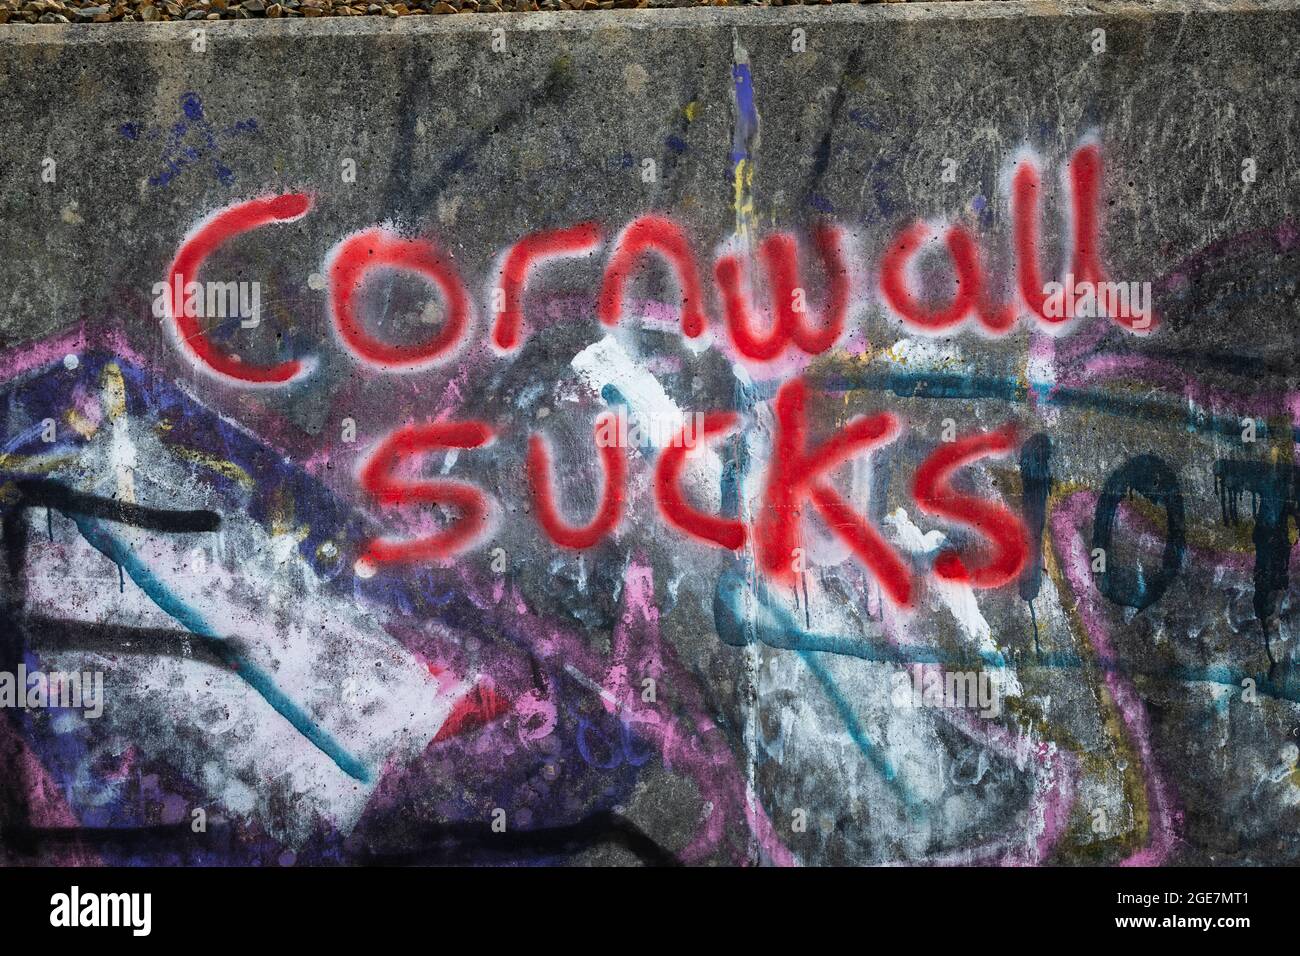 Colourful graffiti about Cornwall on a wall in the county. Stock Photo